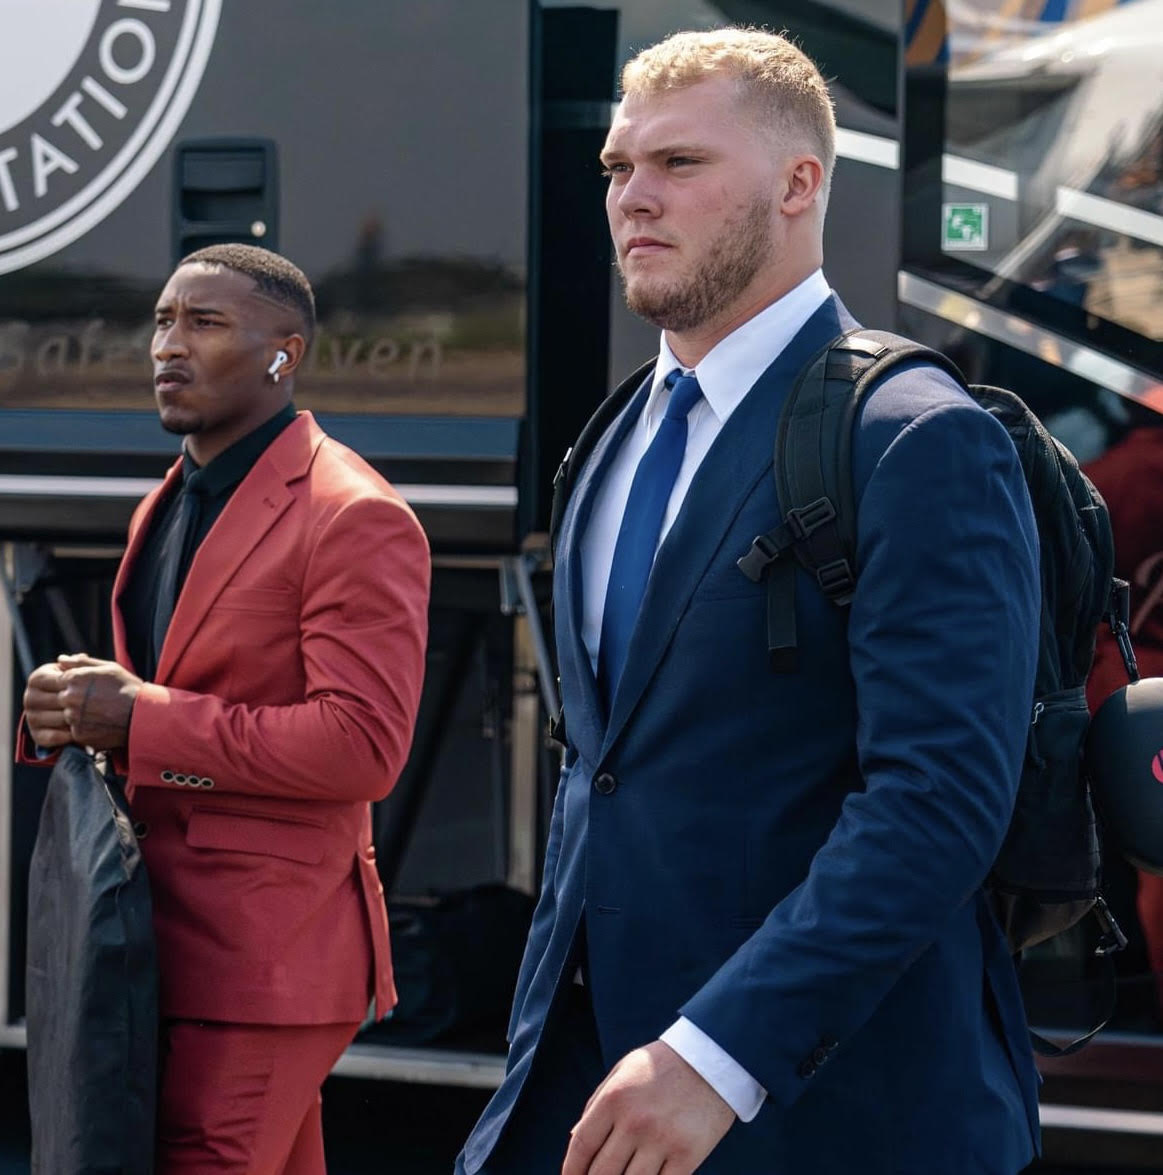 2 Sportsmen wearing a suit walking out from a bus